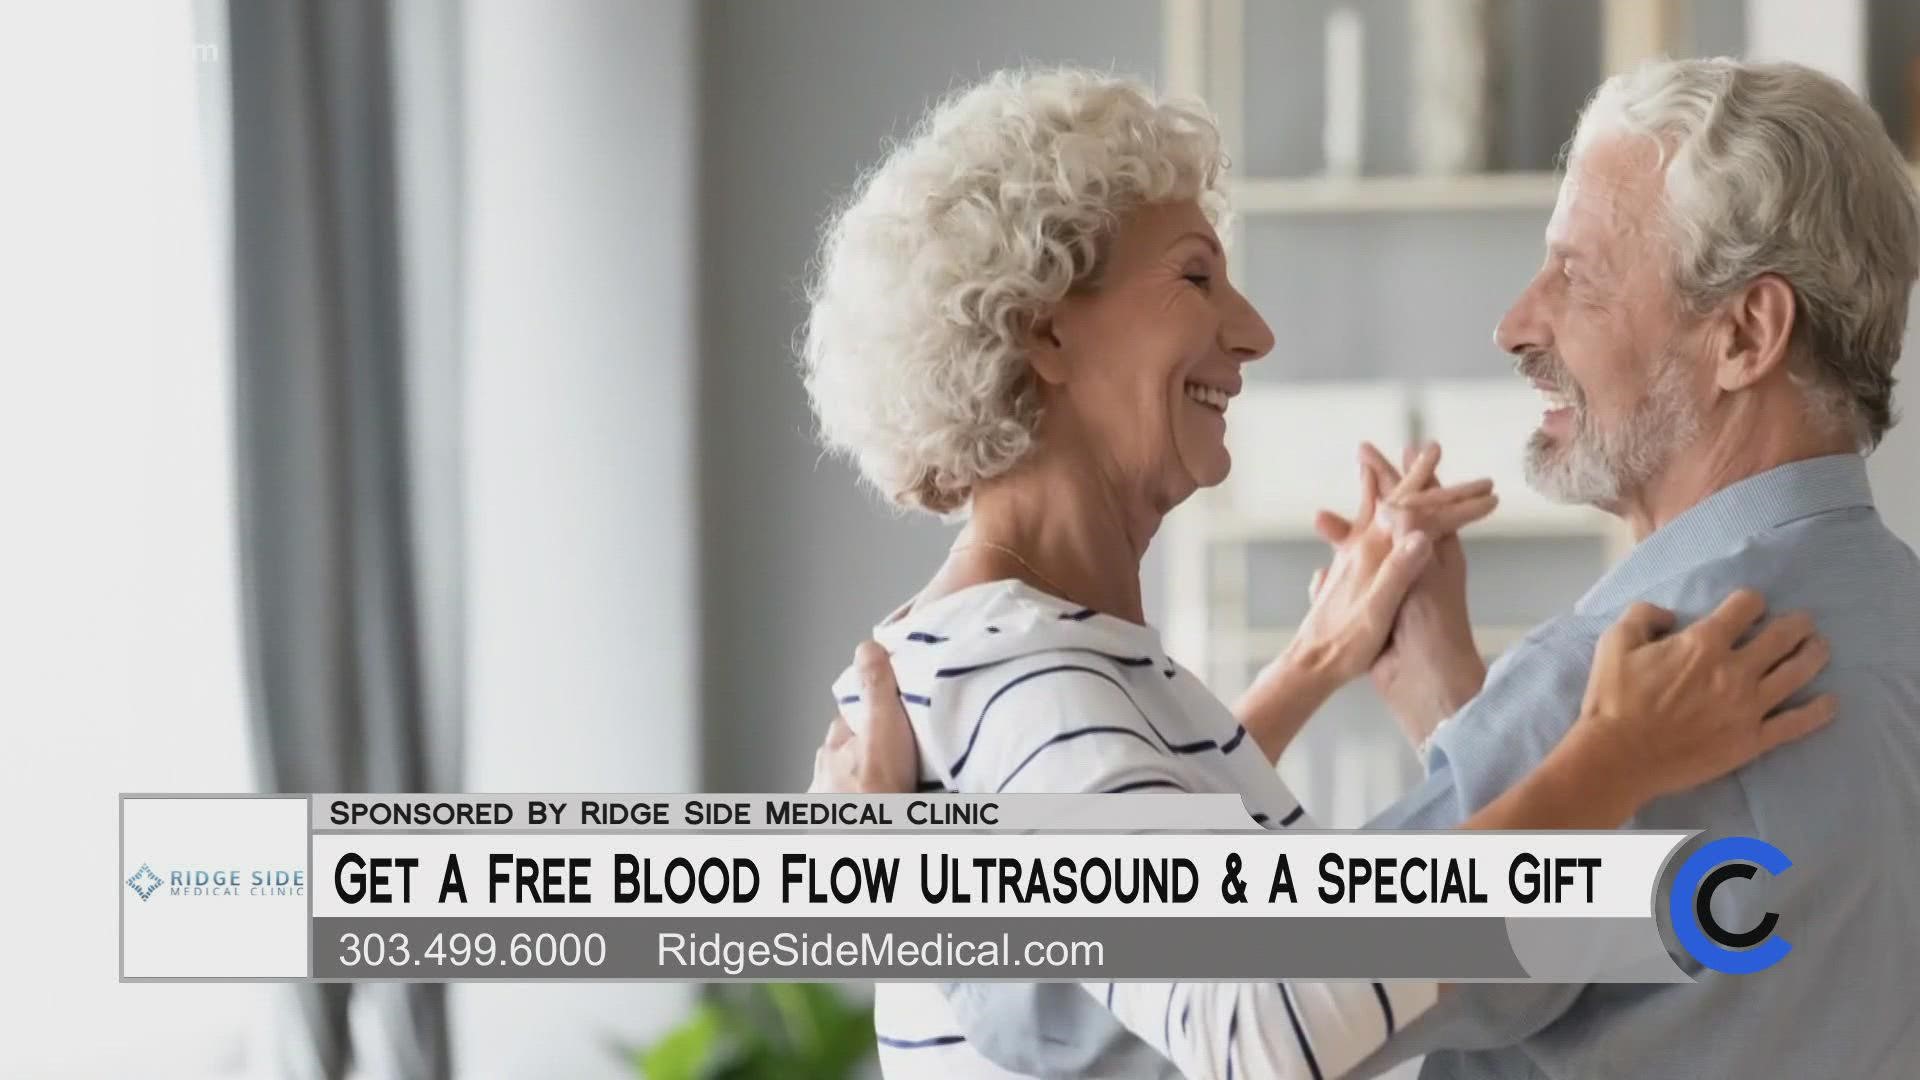 Call 303.499.6000 to get started. Mention COCO and get a free exam, blood flow ultrasound and special gift! Learn more at RidgeSideMedical.com. **PAID CONTENT**